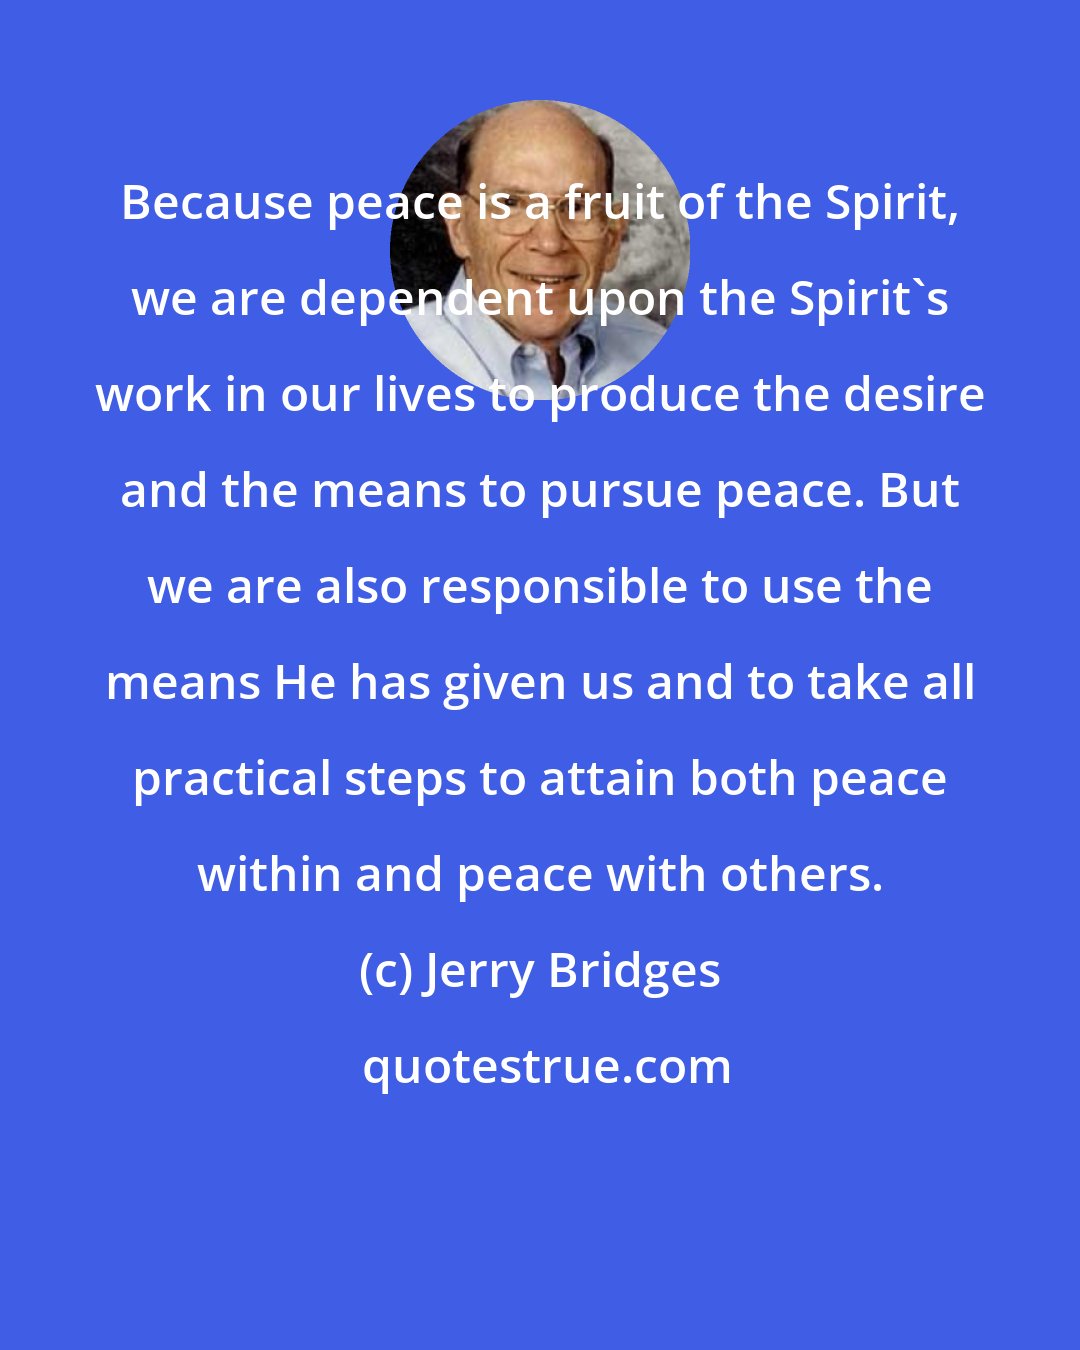 Jerry Bridges: Because peace is a fruit of the Spirit, we are dependent upon the Spirit's work in our lives to produce the desire and the means to pursue peace. But we are also responsible to use the means He has given us and to take all practical steps to attain both peace within and peace with others.